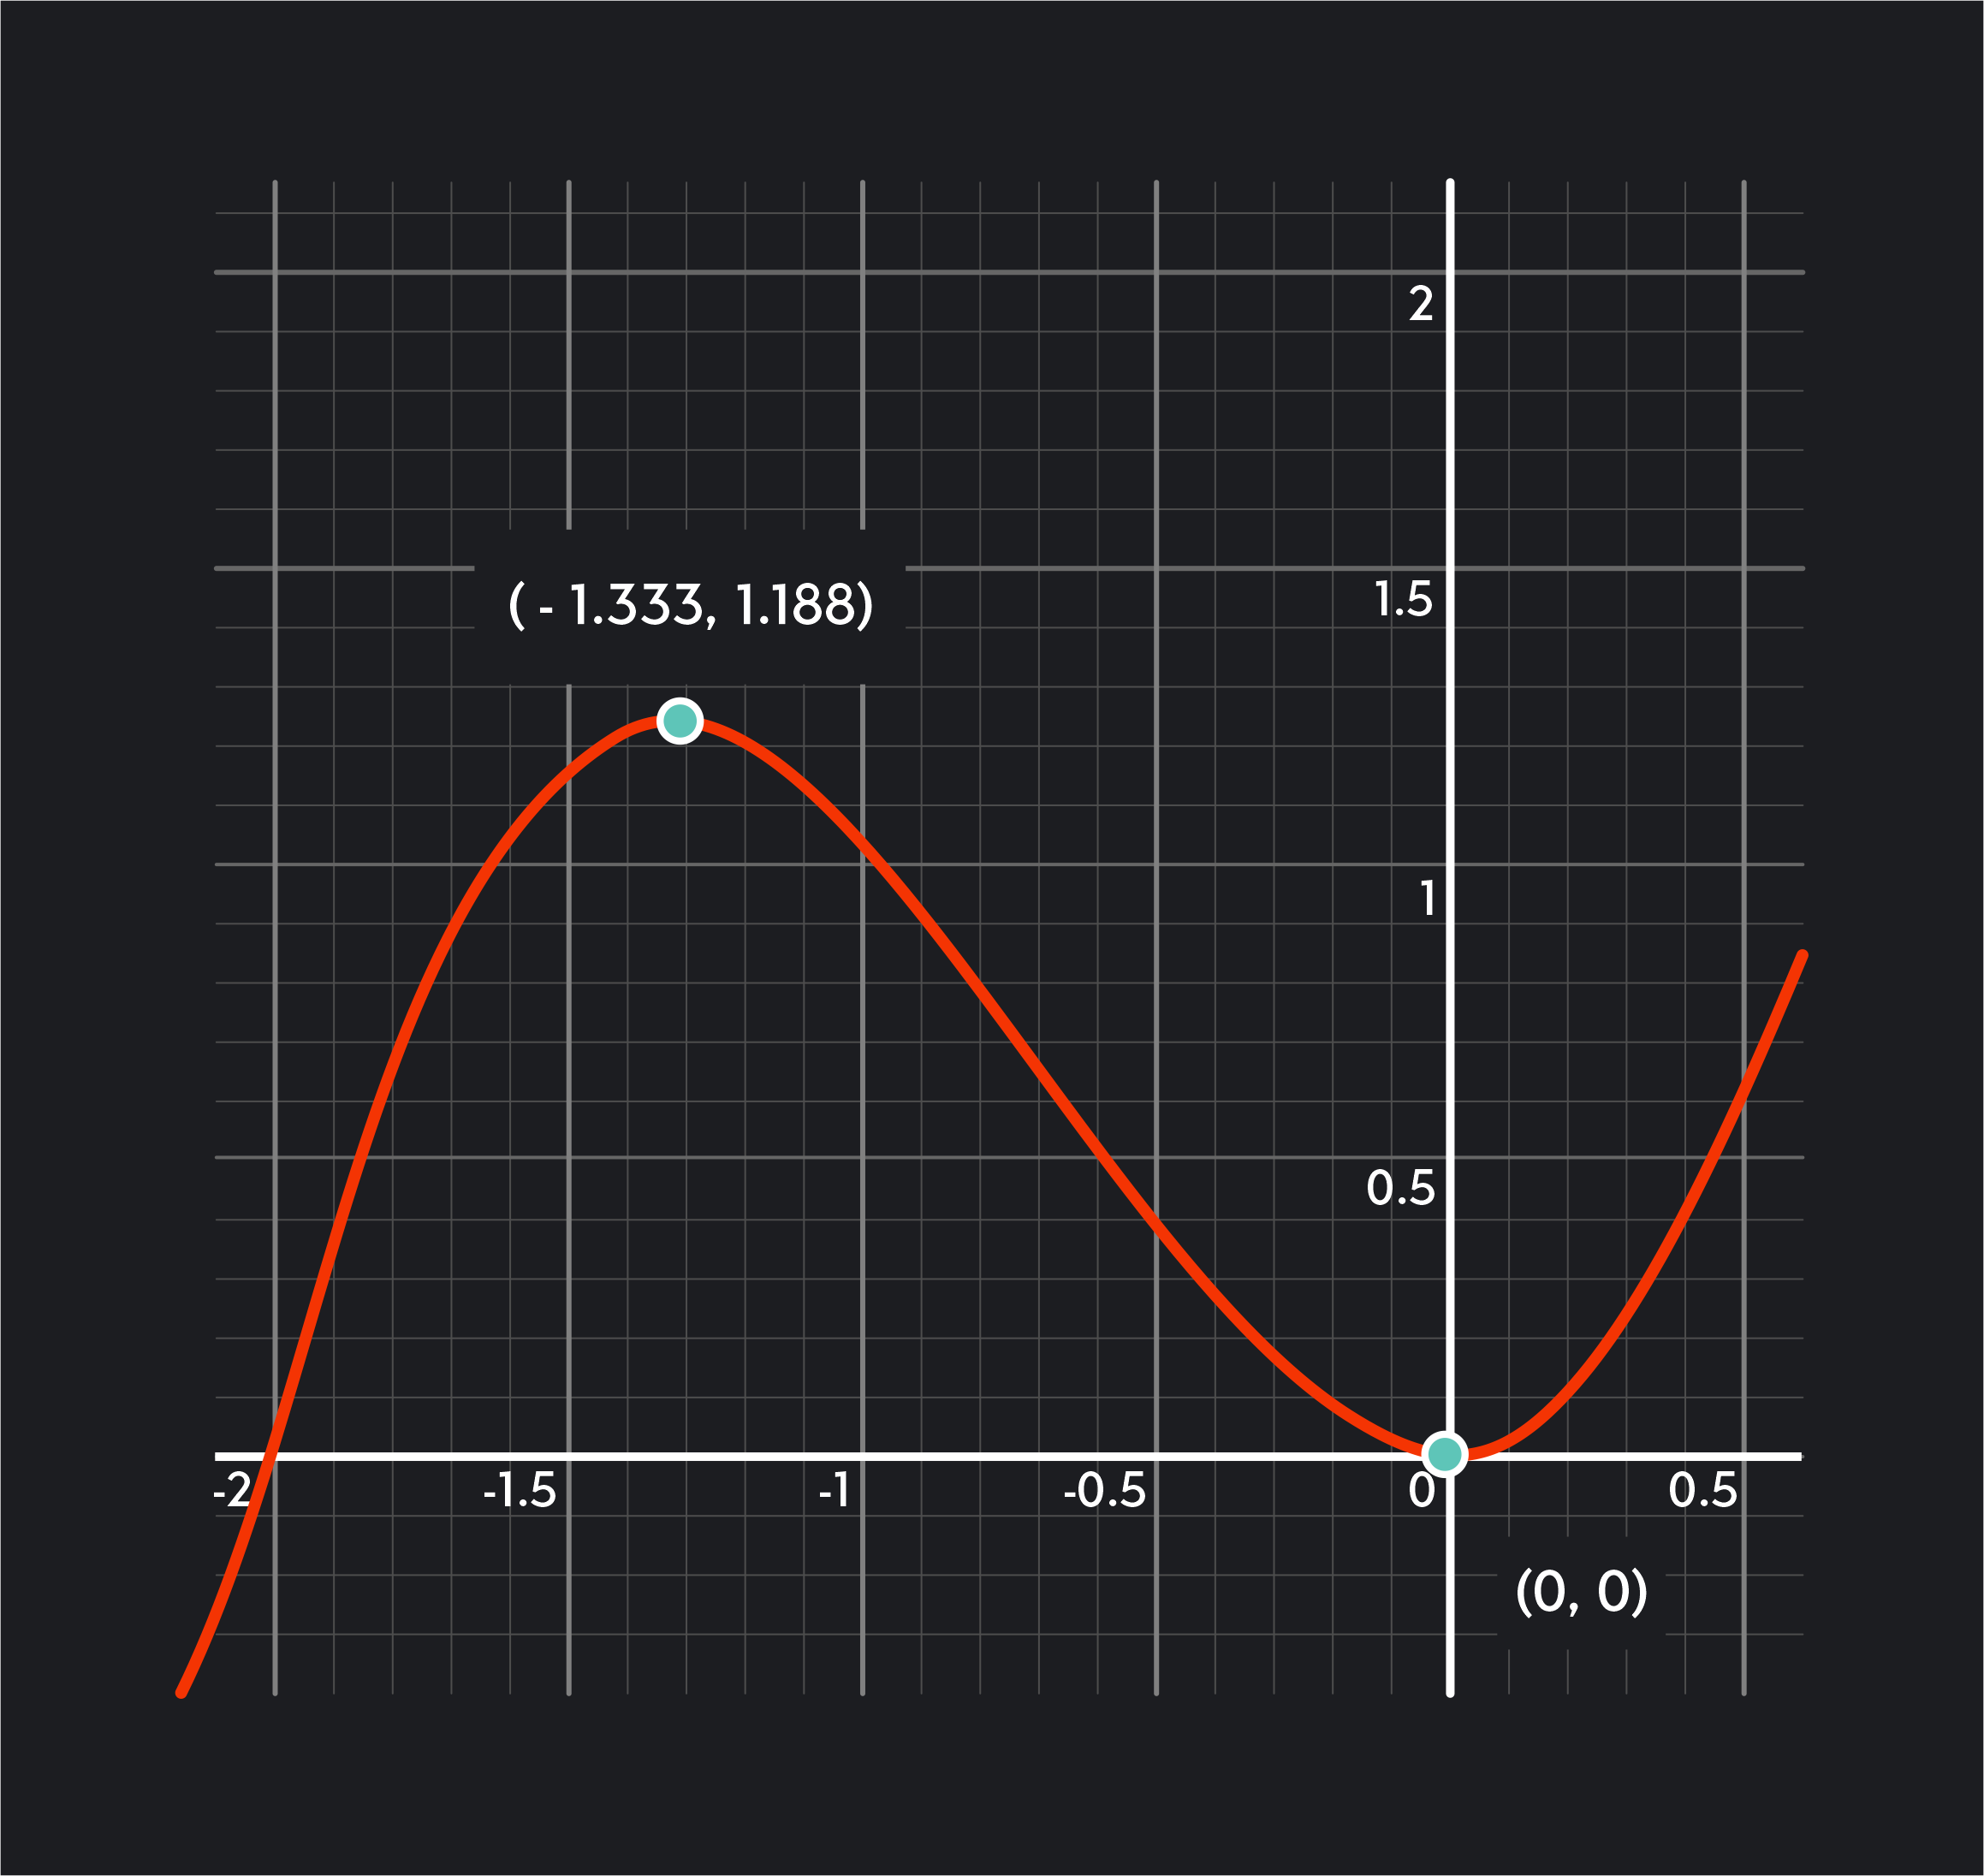 Graph showing y-coordinates of critical points